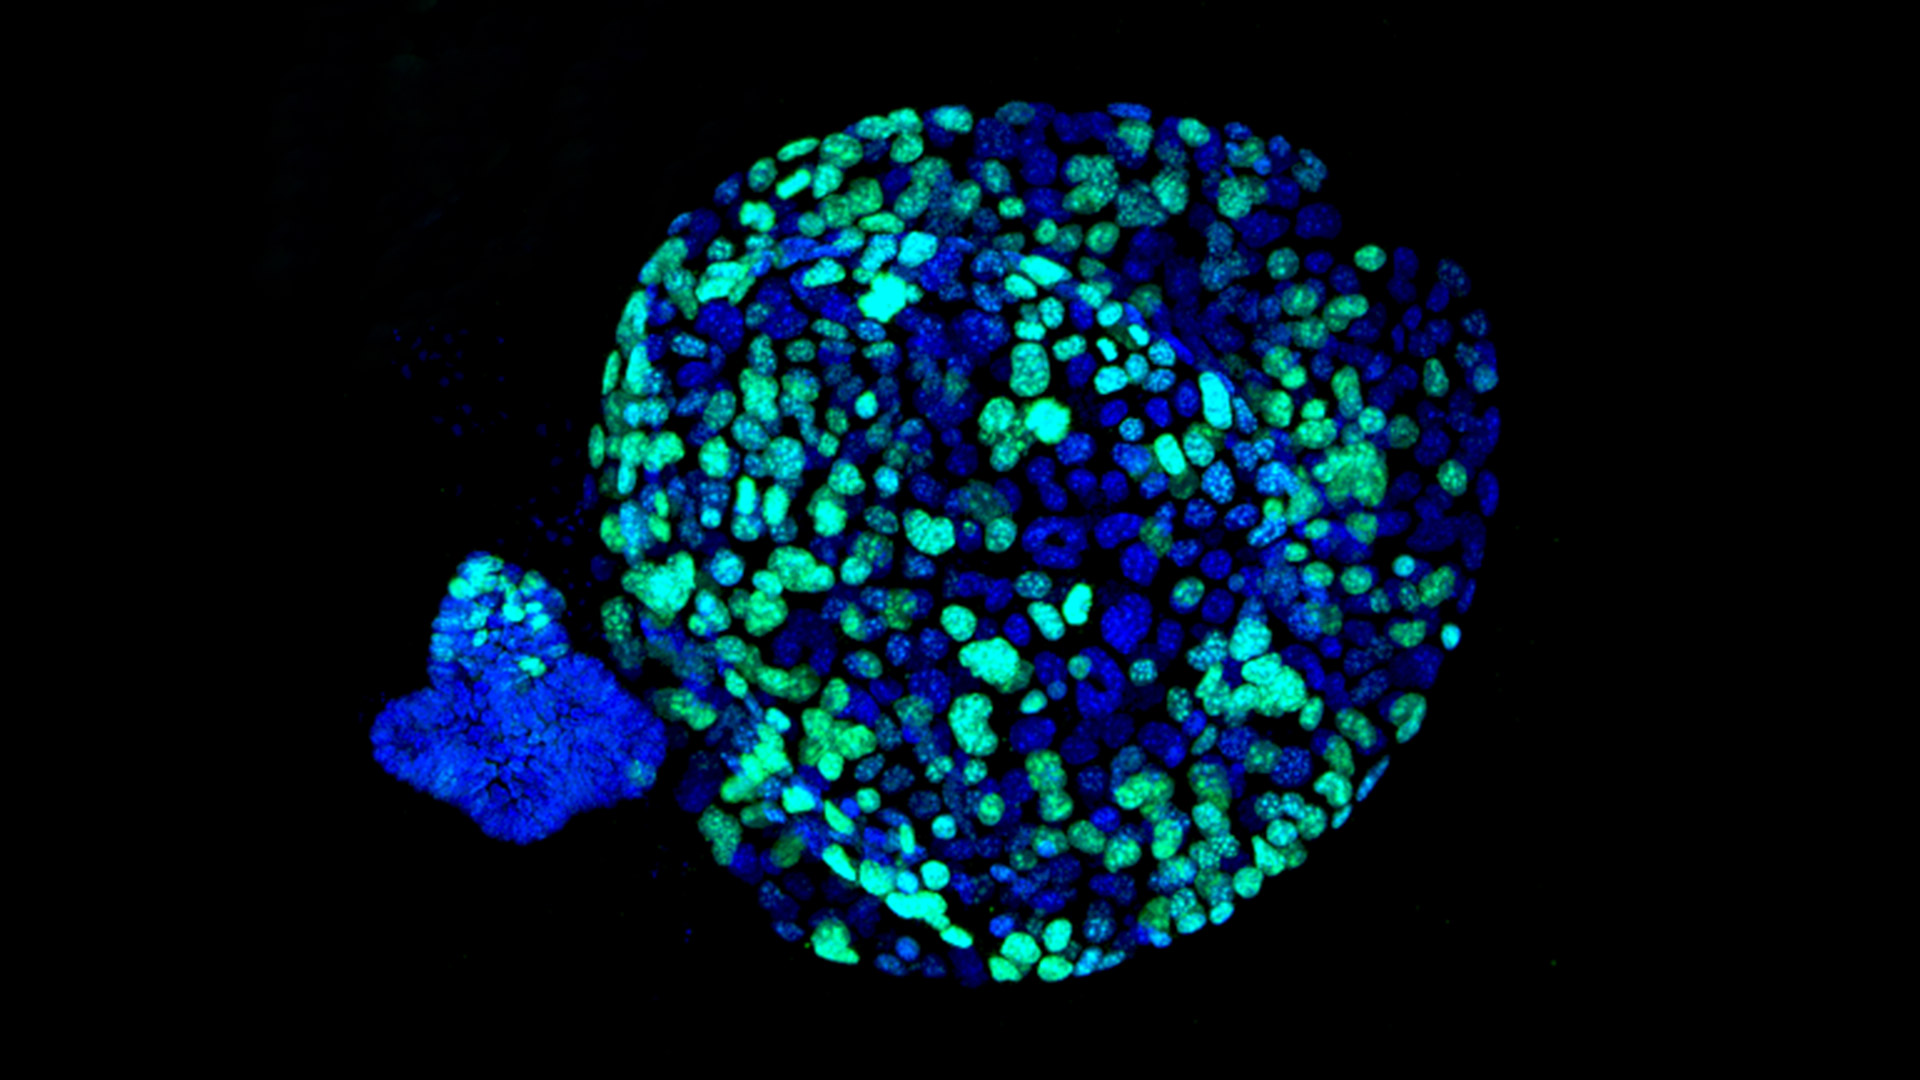 Organoids Accurately Predict Treatment Response of Pancreatic Cancer Patients